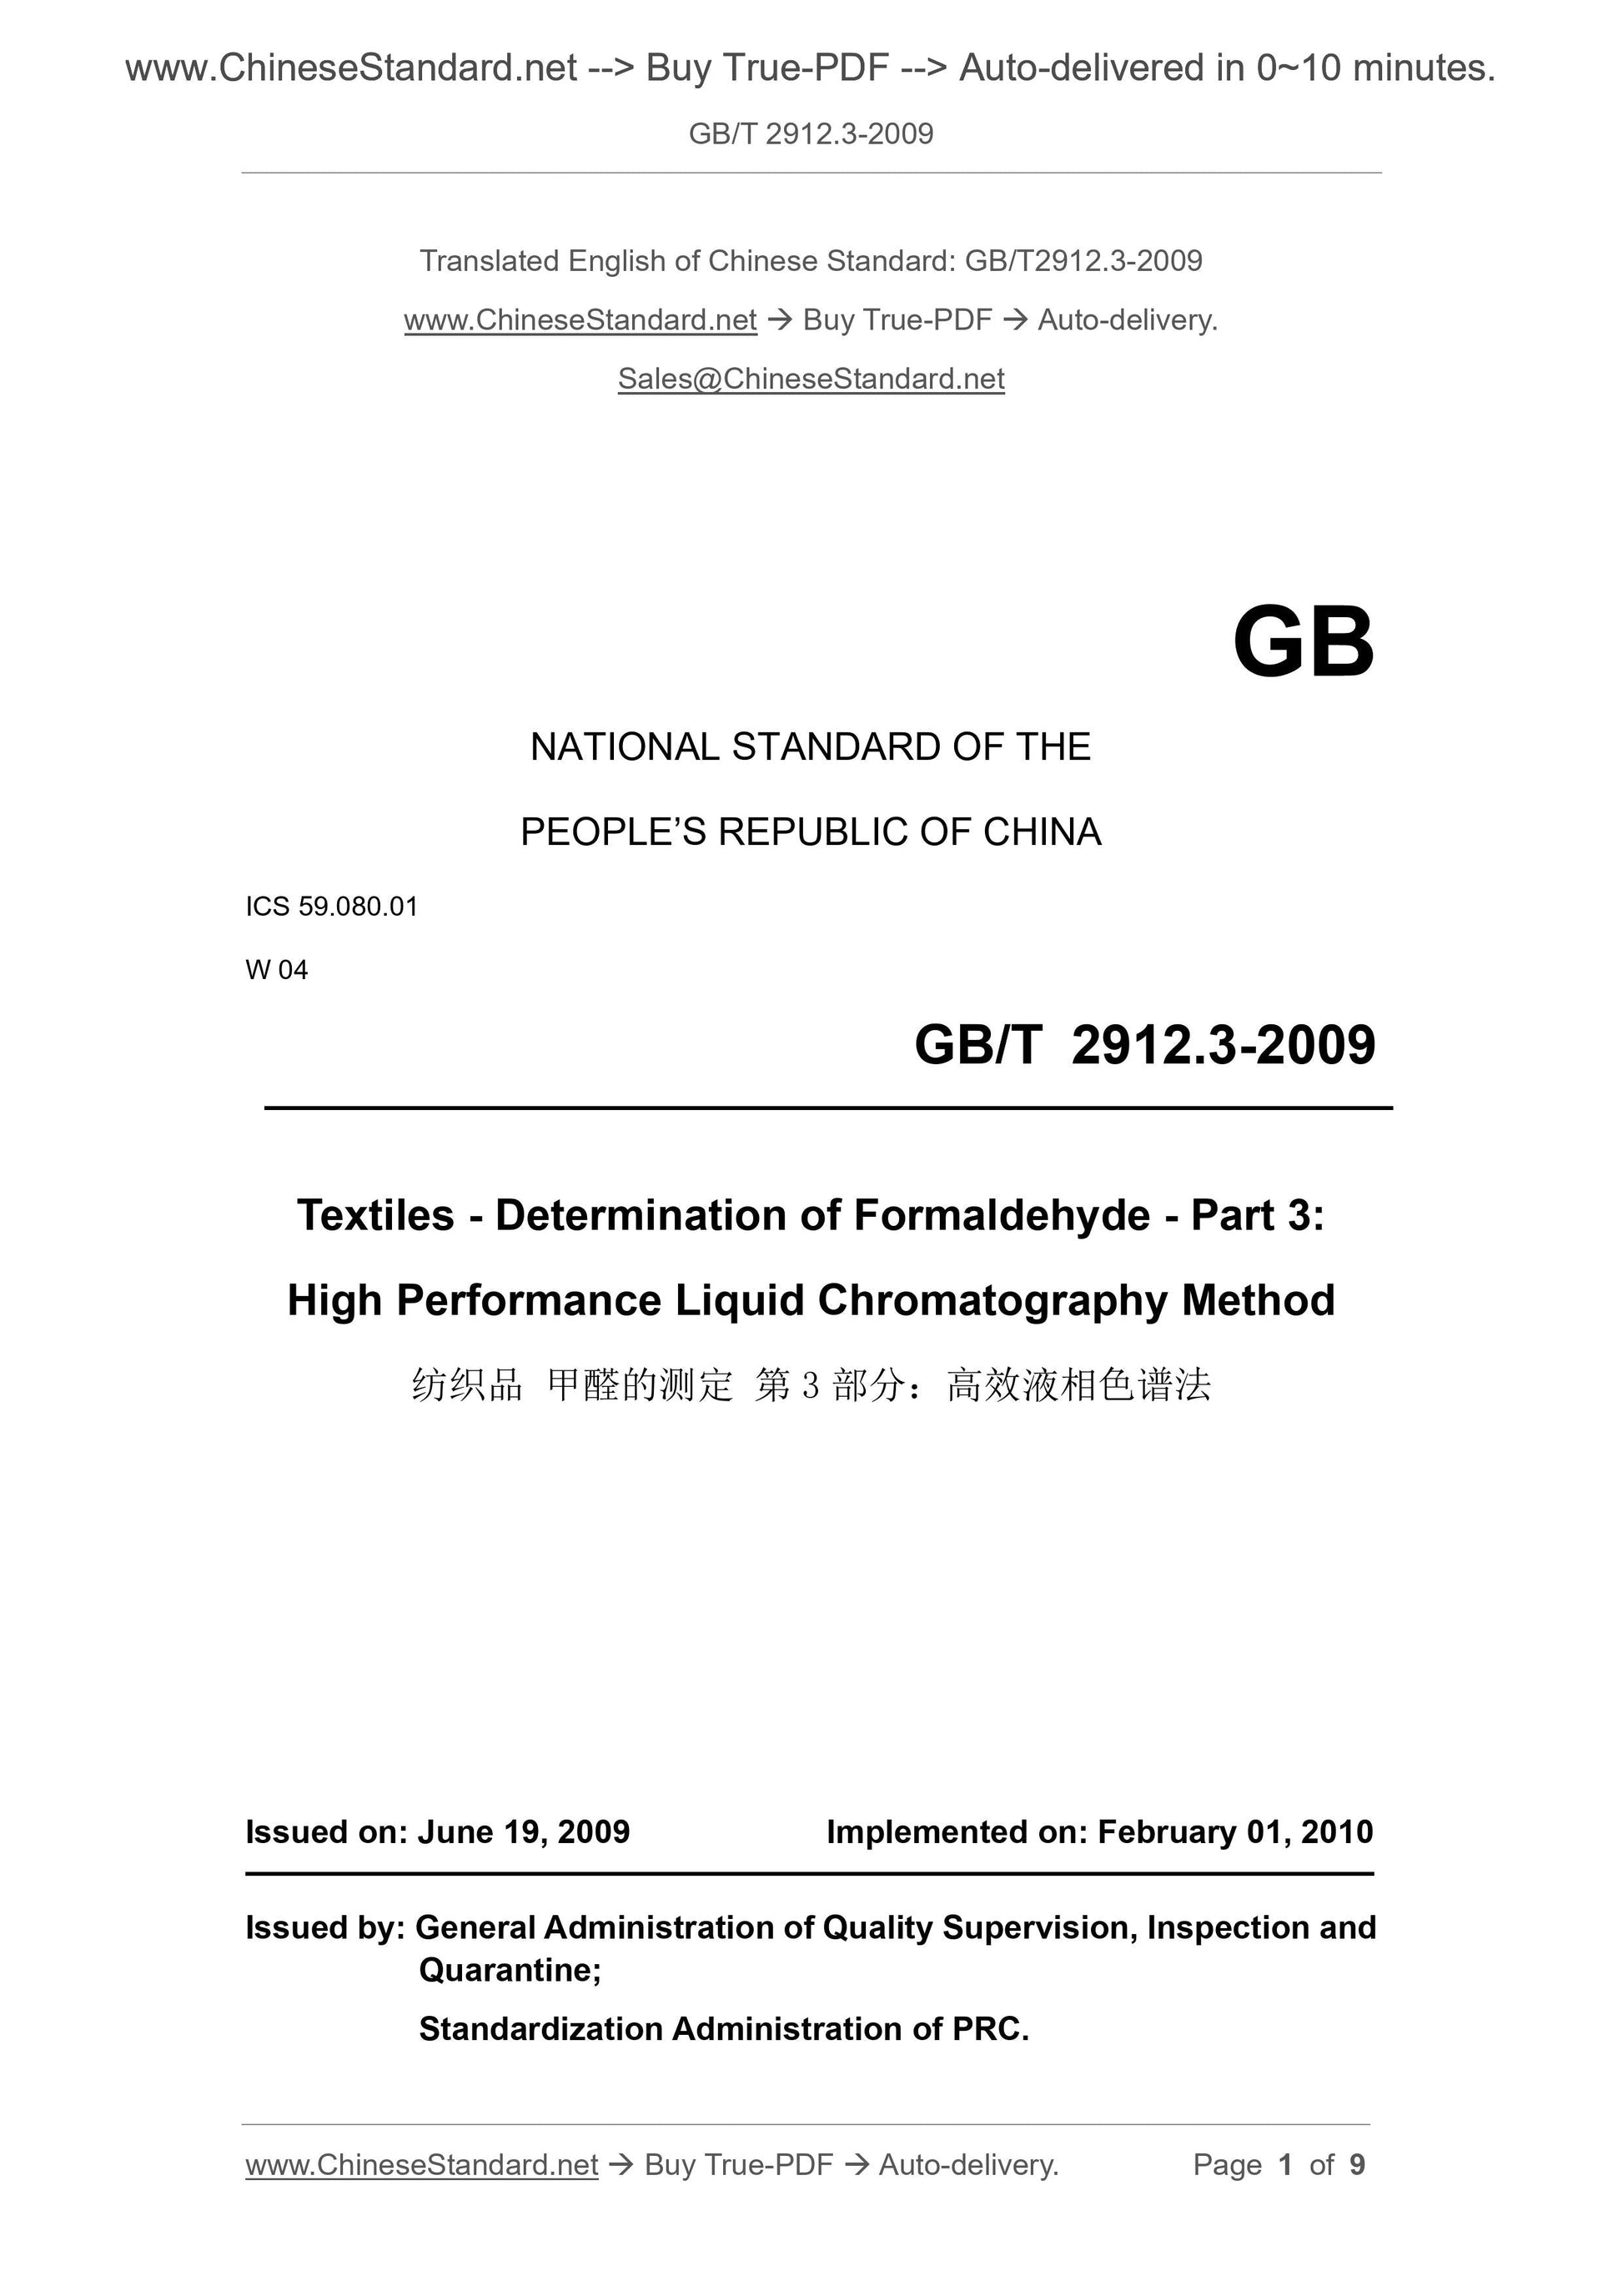 GB/T 2912.3-2009 Page 1